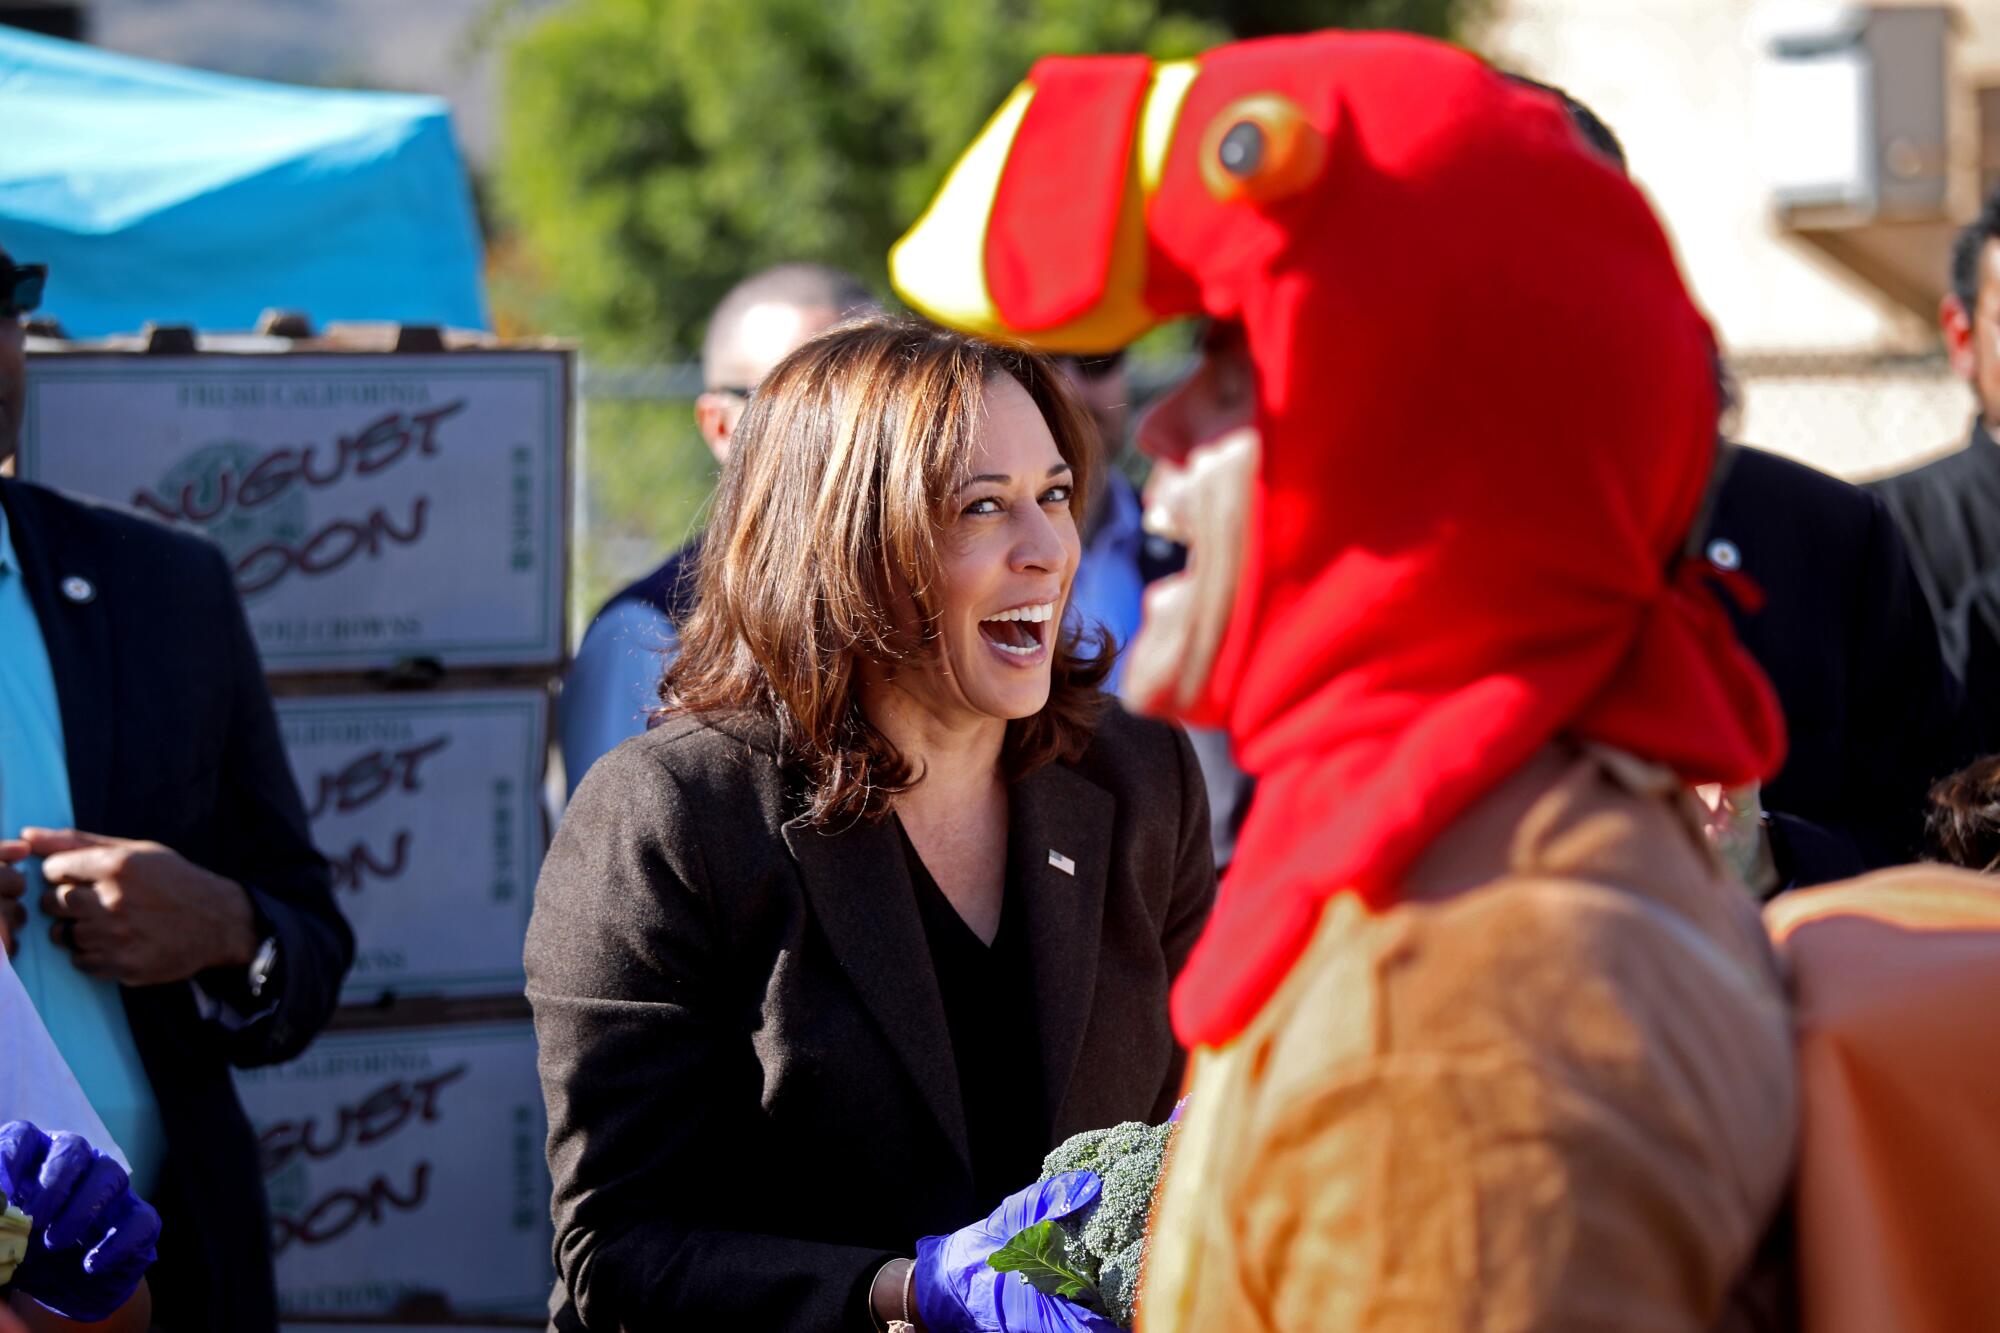 A smiling woman looks at a person dressed as a turkey.